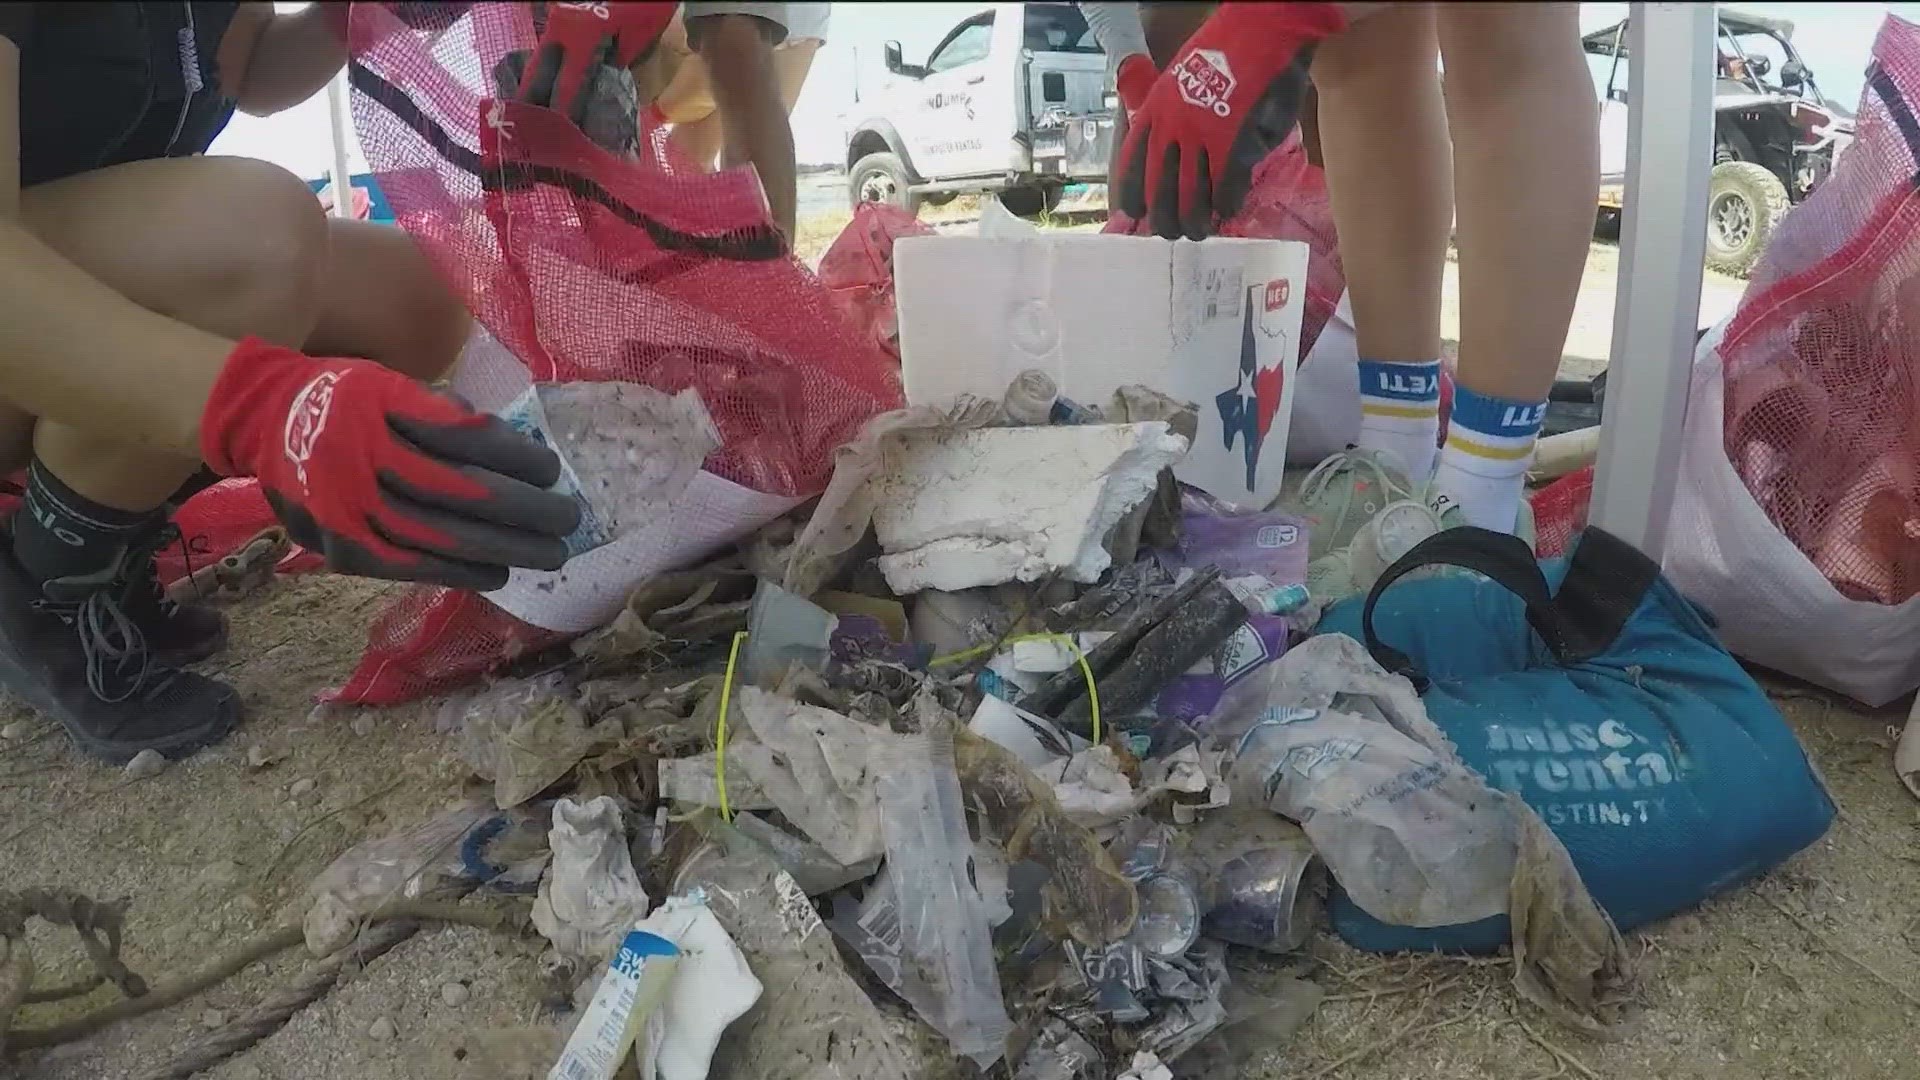 The low lake levels allowed volunteers to extract even more trash from the lake.